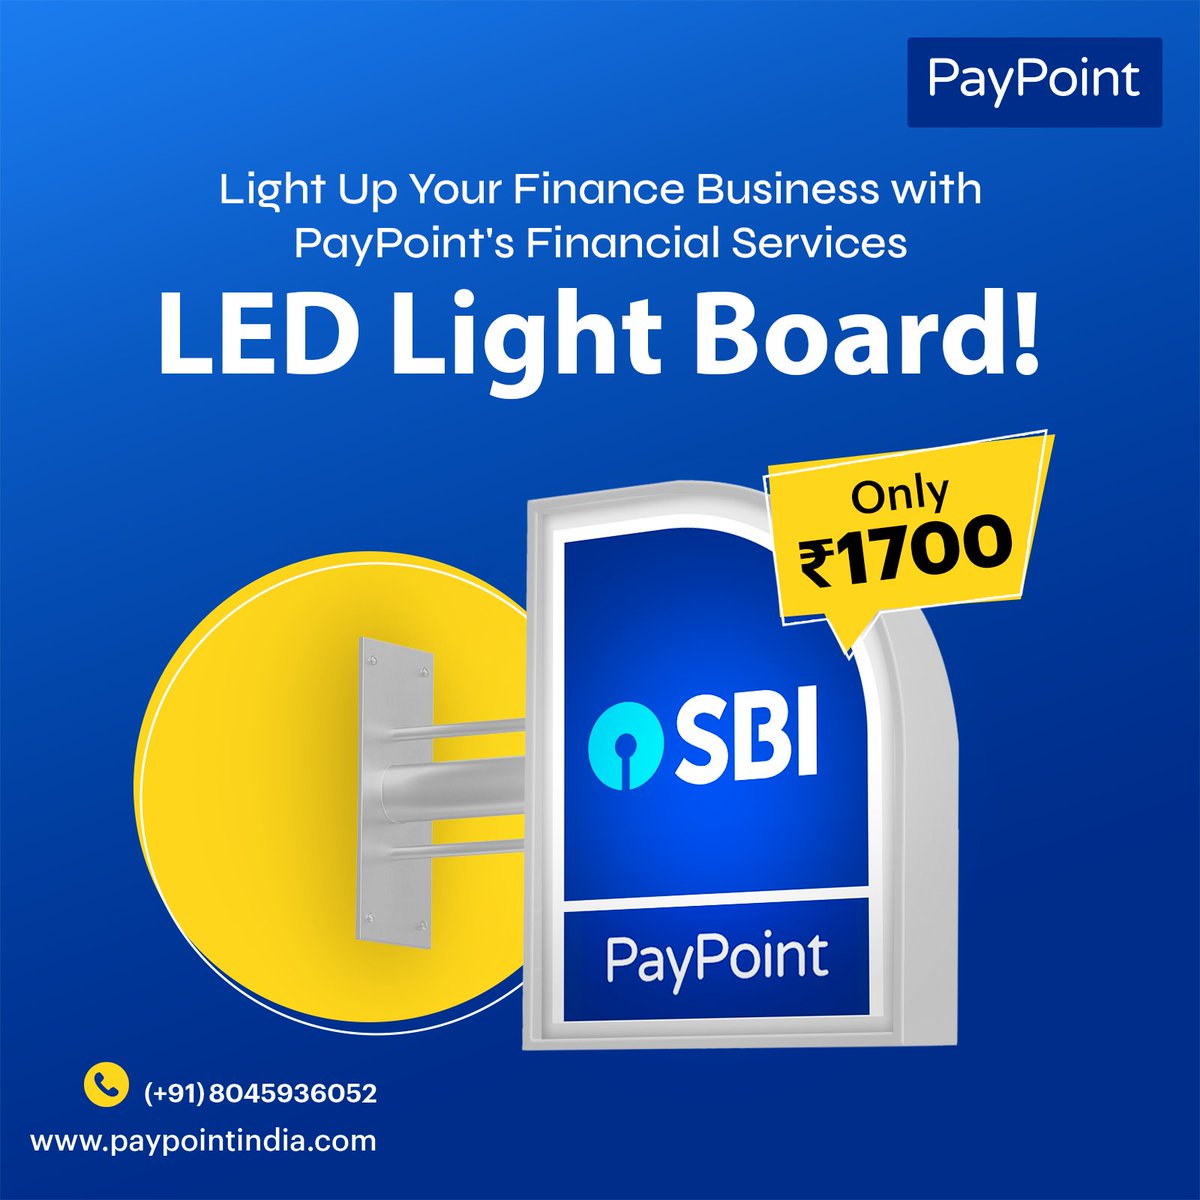 Lighten up your finance business with PayPoint's LED light! Attract more customers with a welcoming ambiance. Get it now for just Rs. 1700.

#PayPoint #HarPaymentDigital #SBI #KioskBanking #CSP #BankingServices #FinancialInclusion #RuralBanking #DigitalVikas